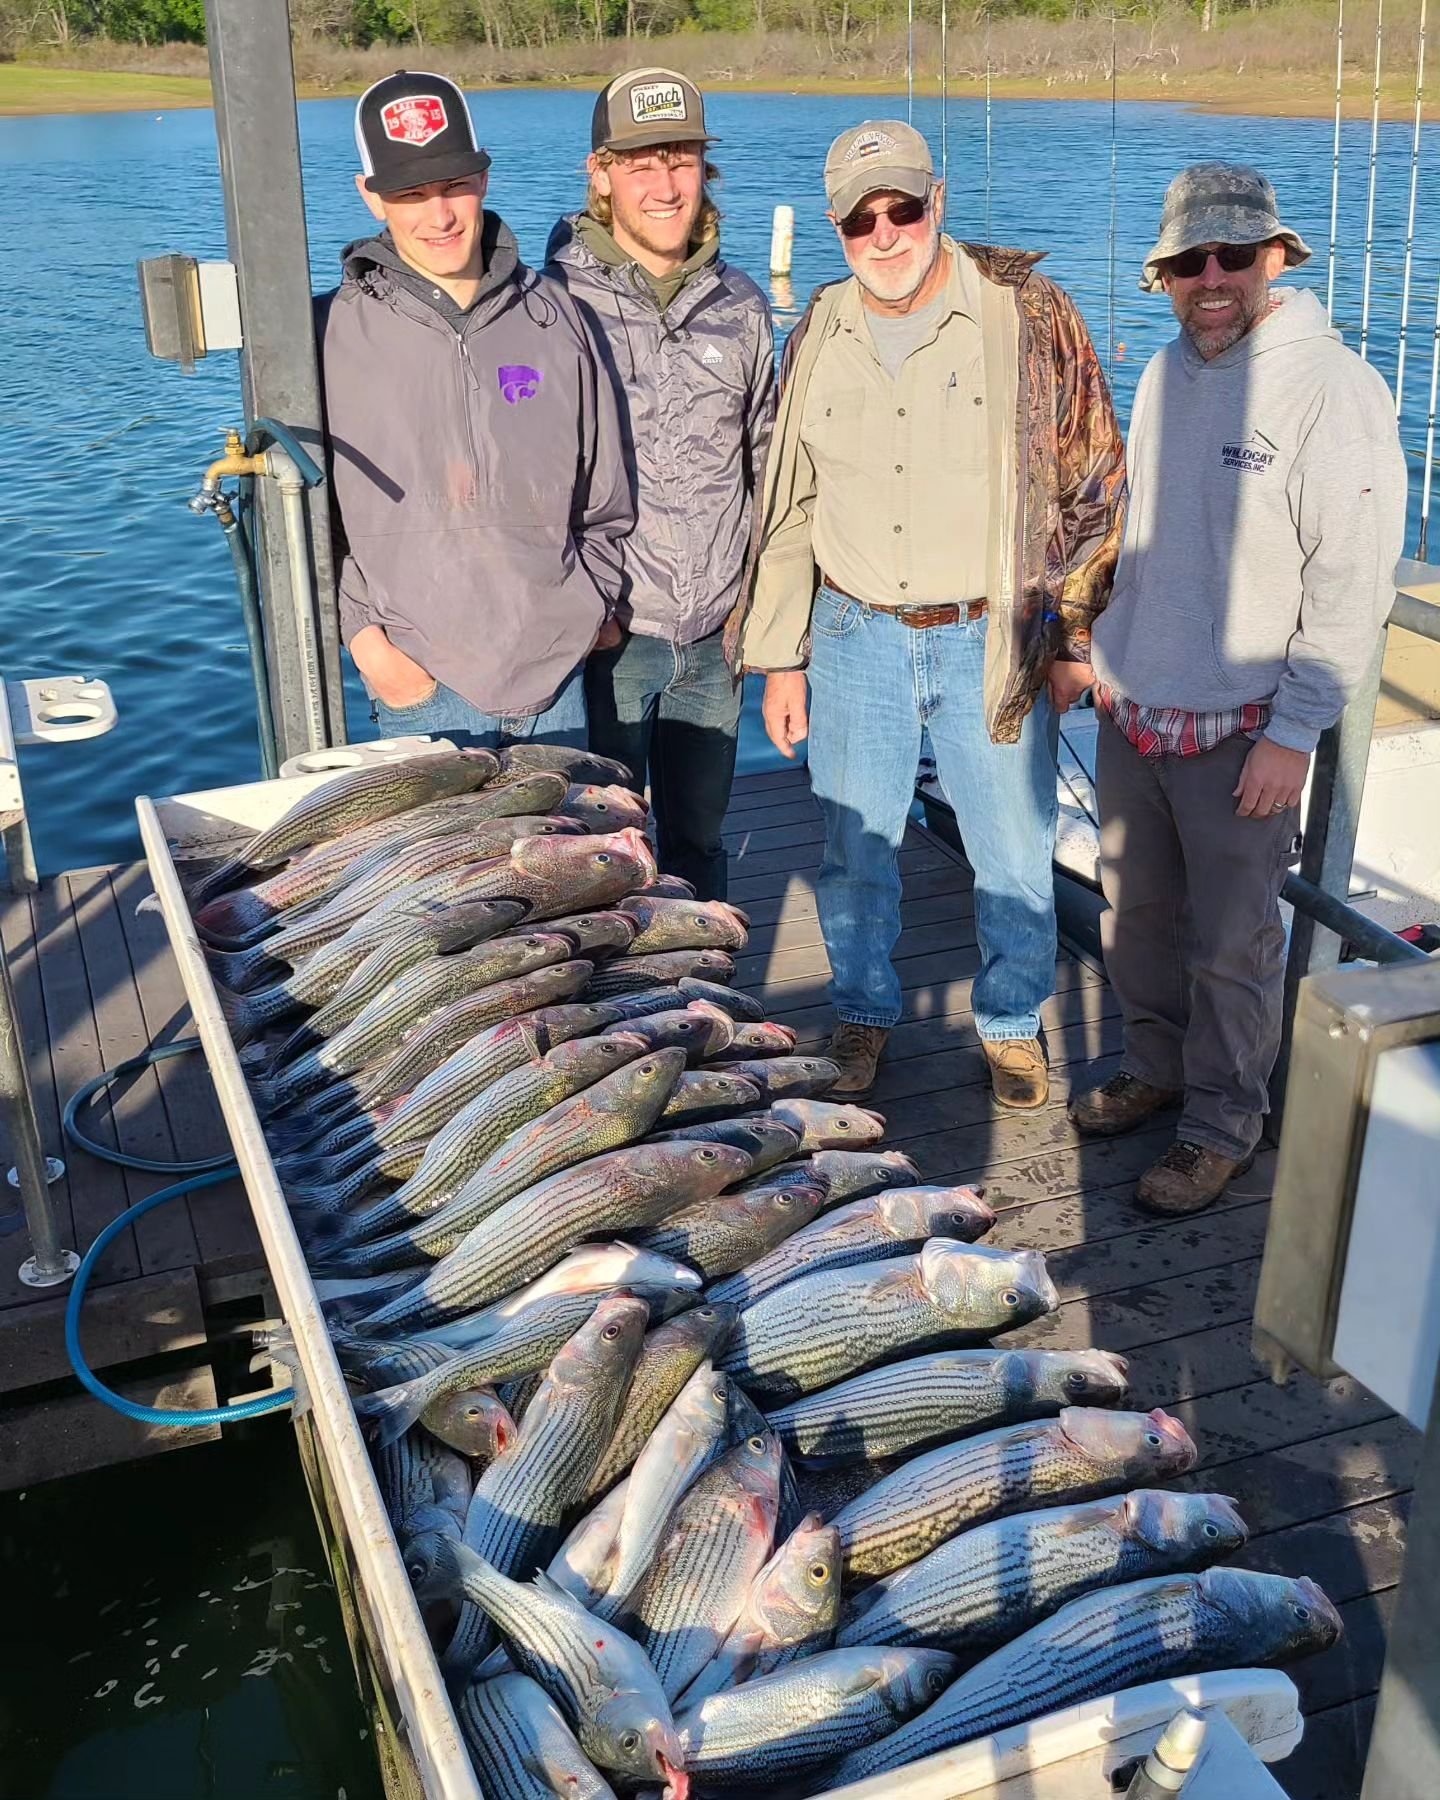 It's been a great week to be out on the water! The weather is nice and the bite gets better every day. Thank you all for booking and keeping us busy!

#GoodTimesFishingCo #LakeTexoma #OklahomaFishing #OklahomaFishingTrail #OKStateParks #OklahomaNatur